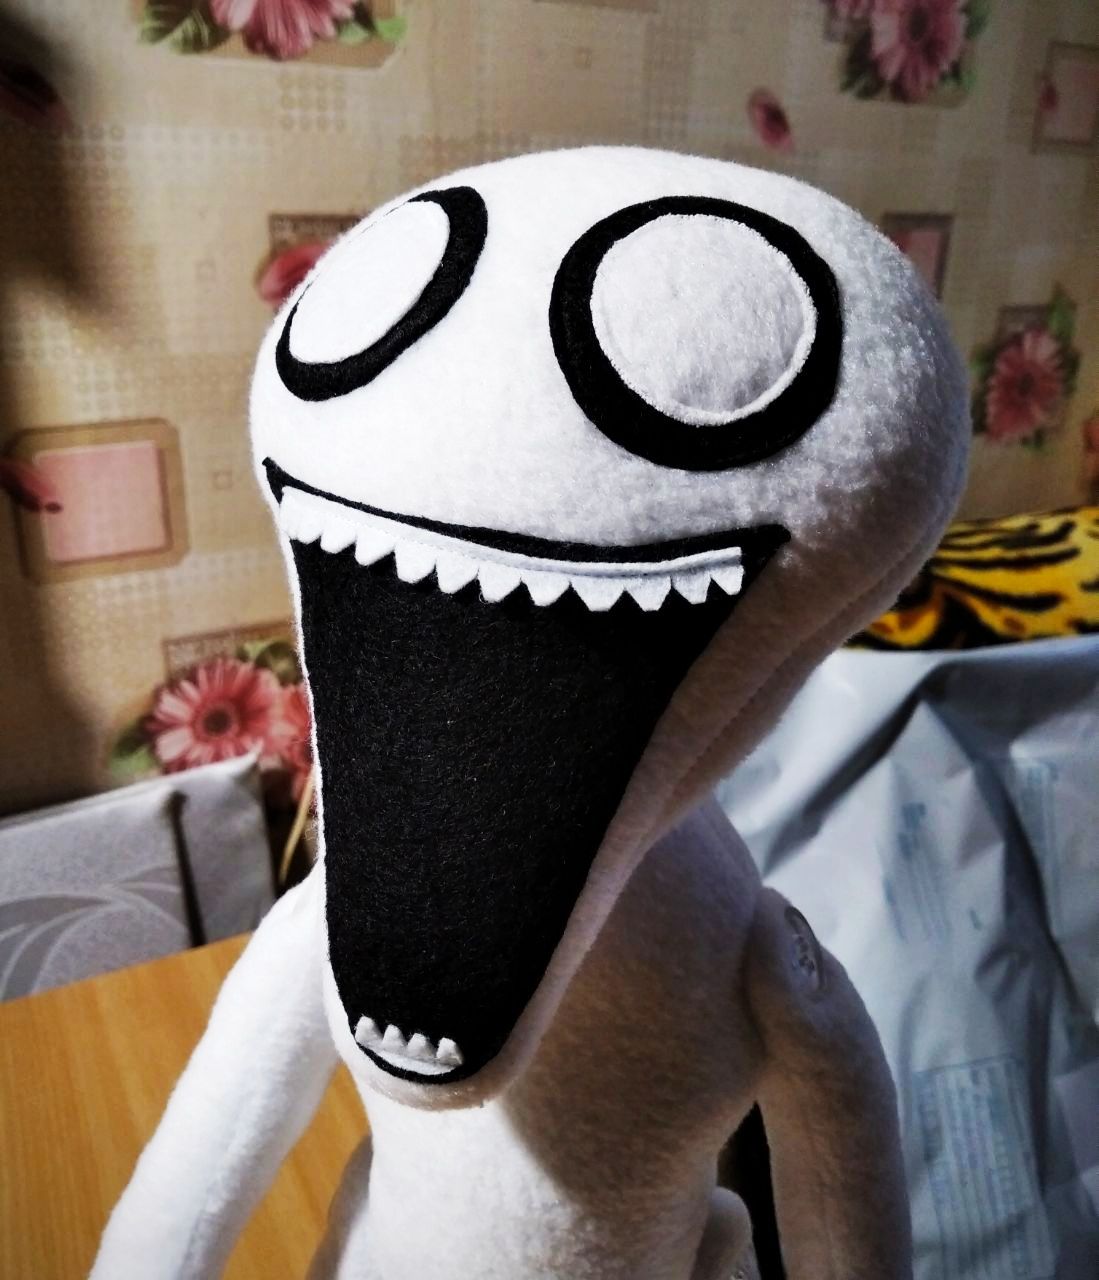  FIMIGID SCP Plush Toy, SCP 096 Monster Horror Stuffed Toy Doll  for Kids : Toys & Games